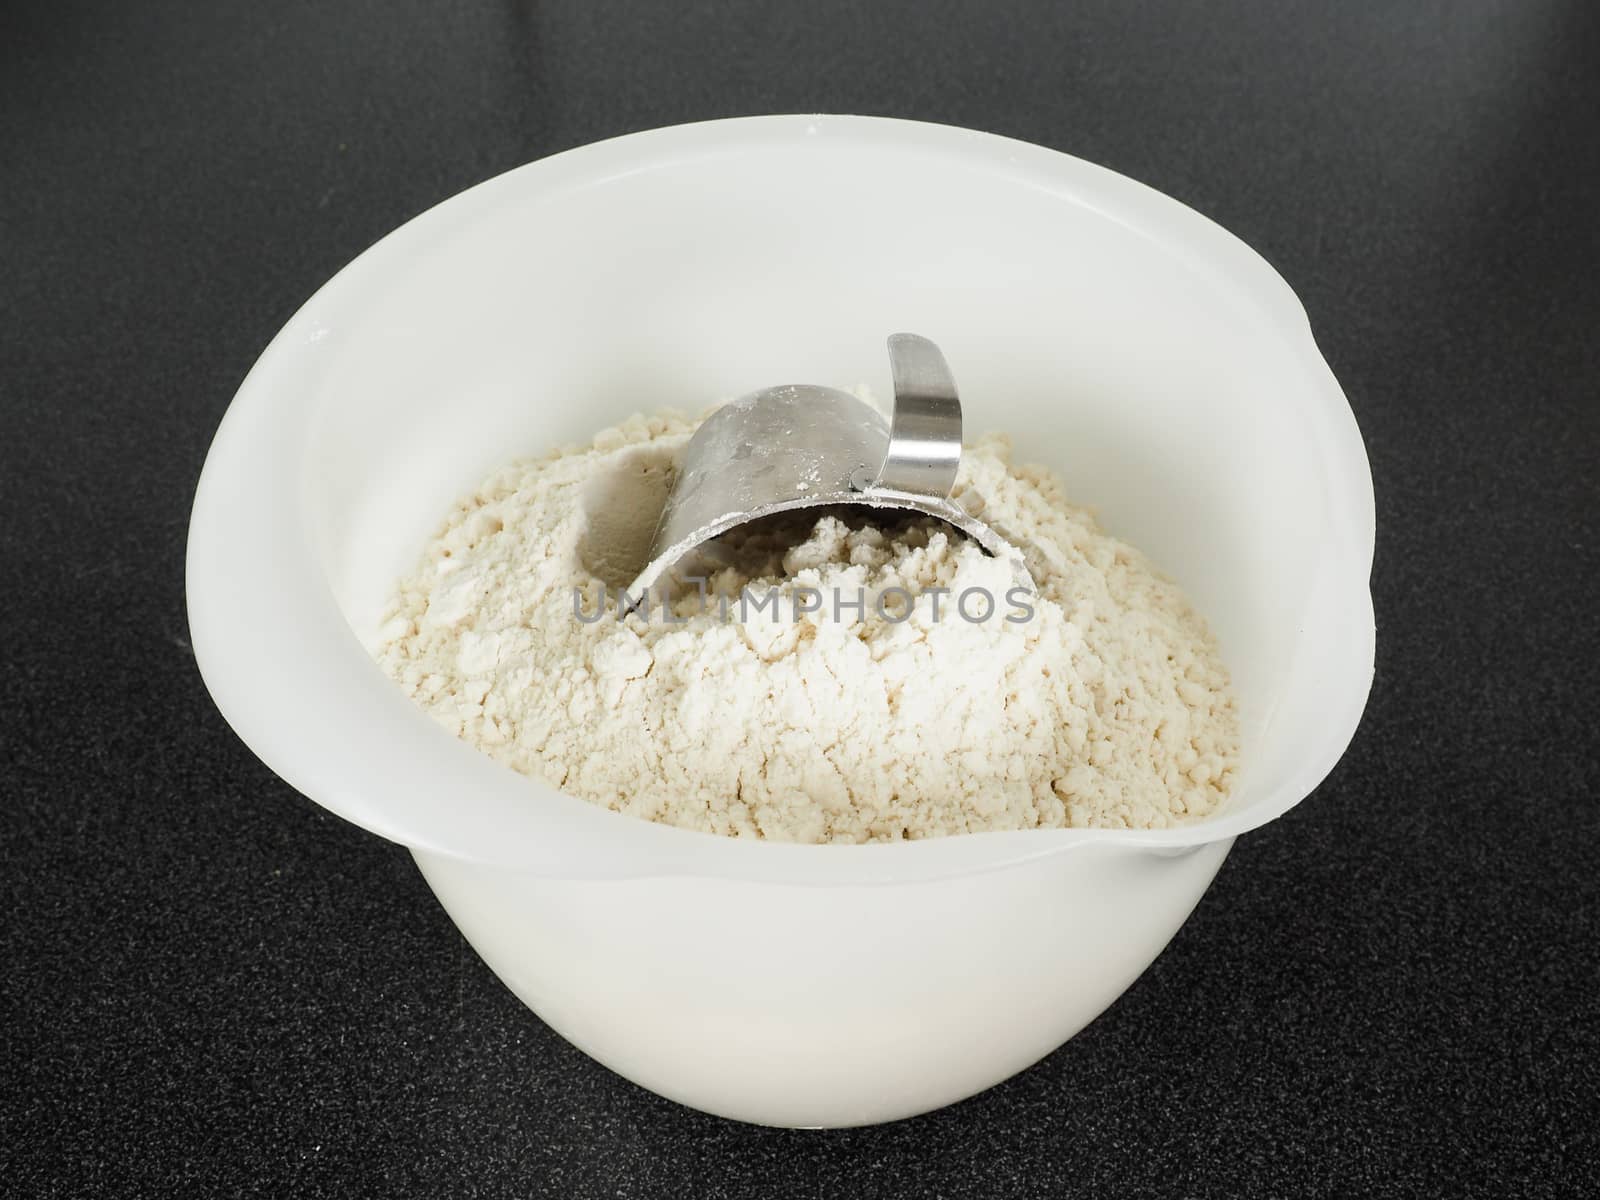 Measurement tool in a bowl of wheat flour by Arvebettum